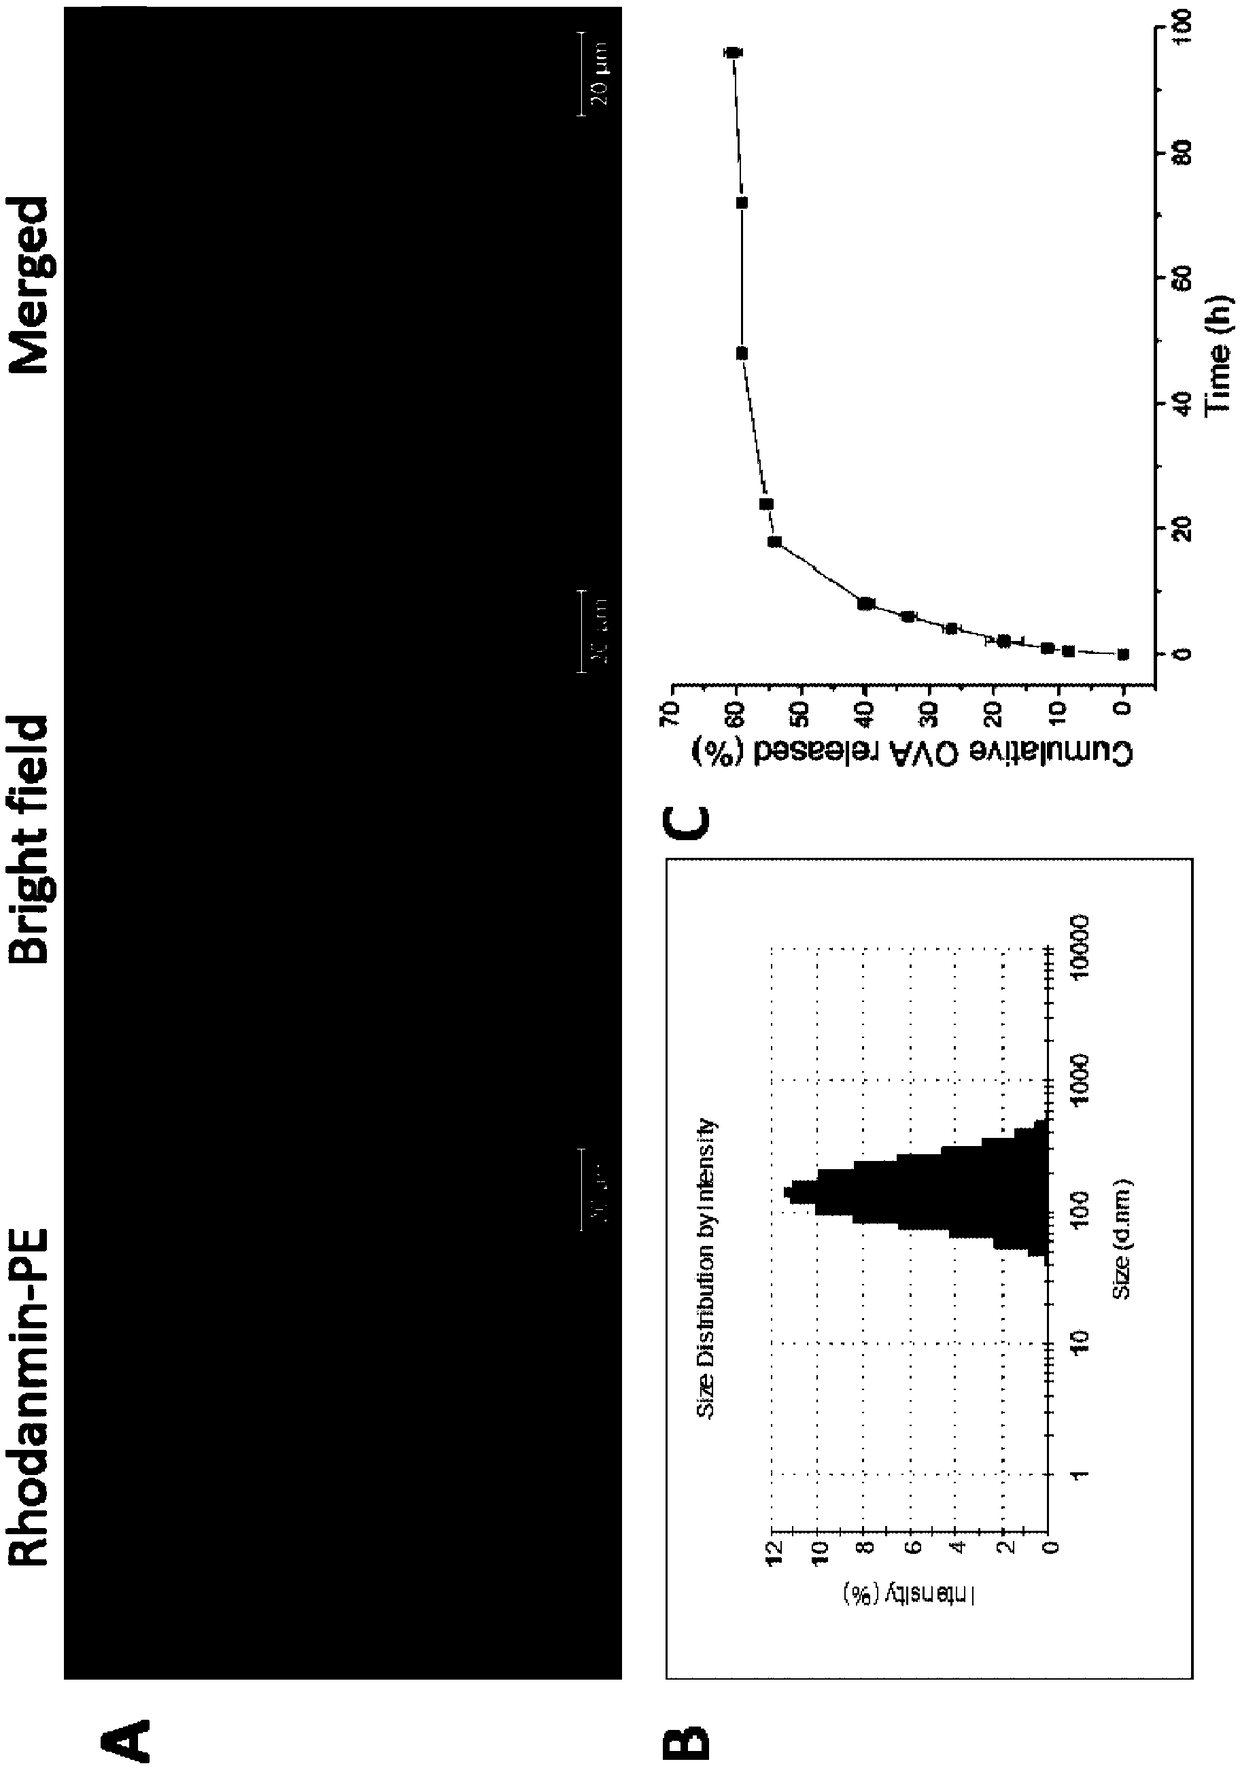 Cationic phospholipid-polymer hybridized nanoparticle vaccine adjuvant of common-carrier antigen, MPLA (Monophosphoryl Lipid A) and IMQ (Imiquimod) as well as preparation method and application thereof